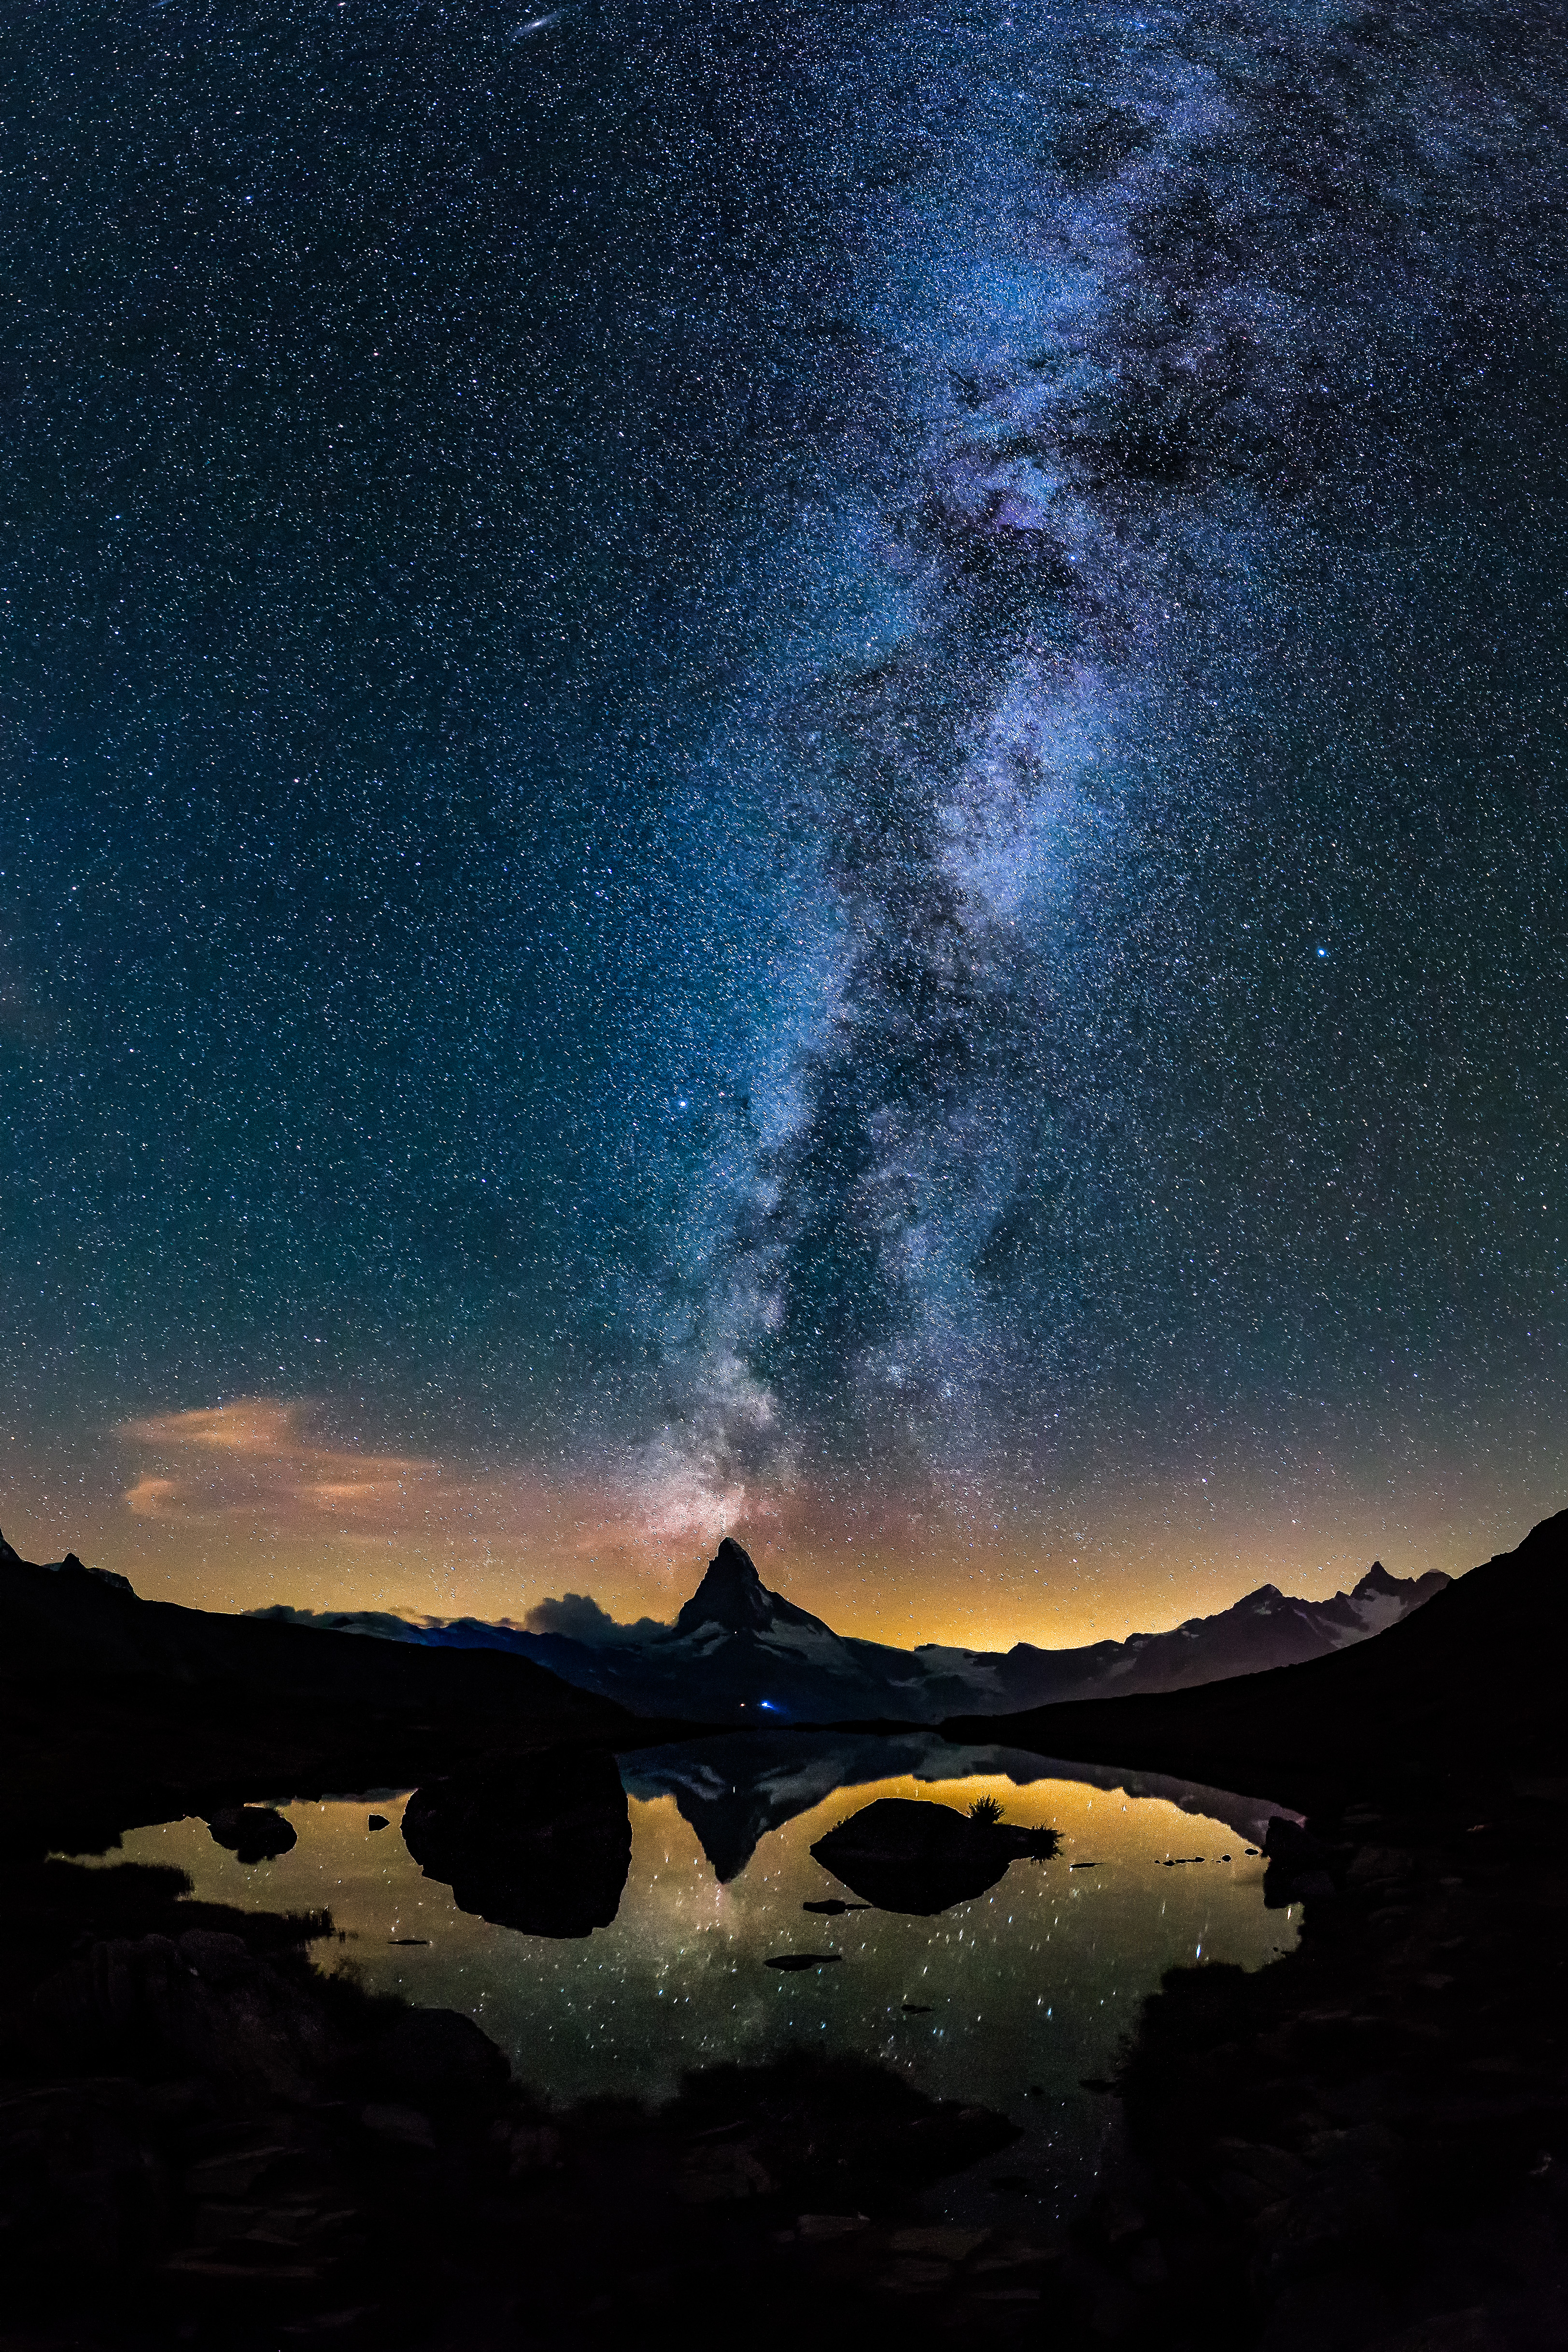 universe, nature, mountains, lake, starry sky wallpaper for mobile